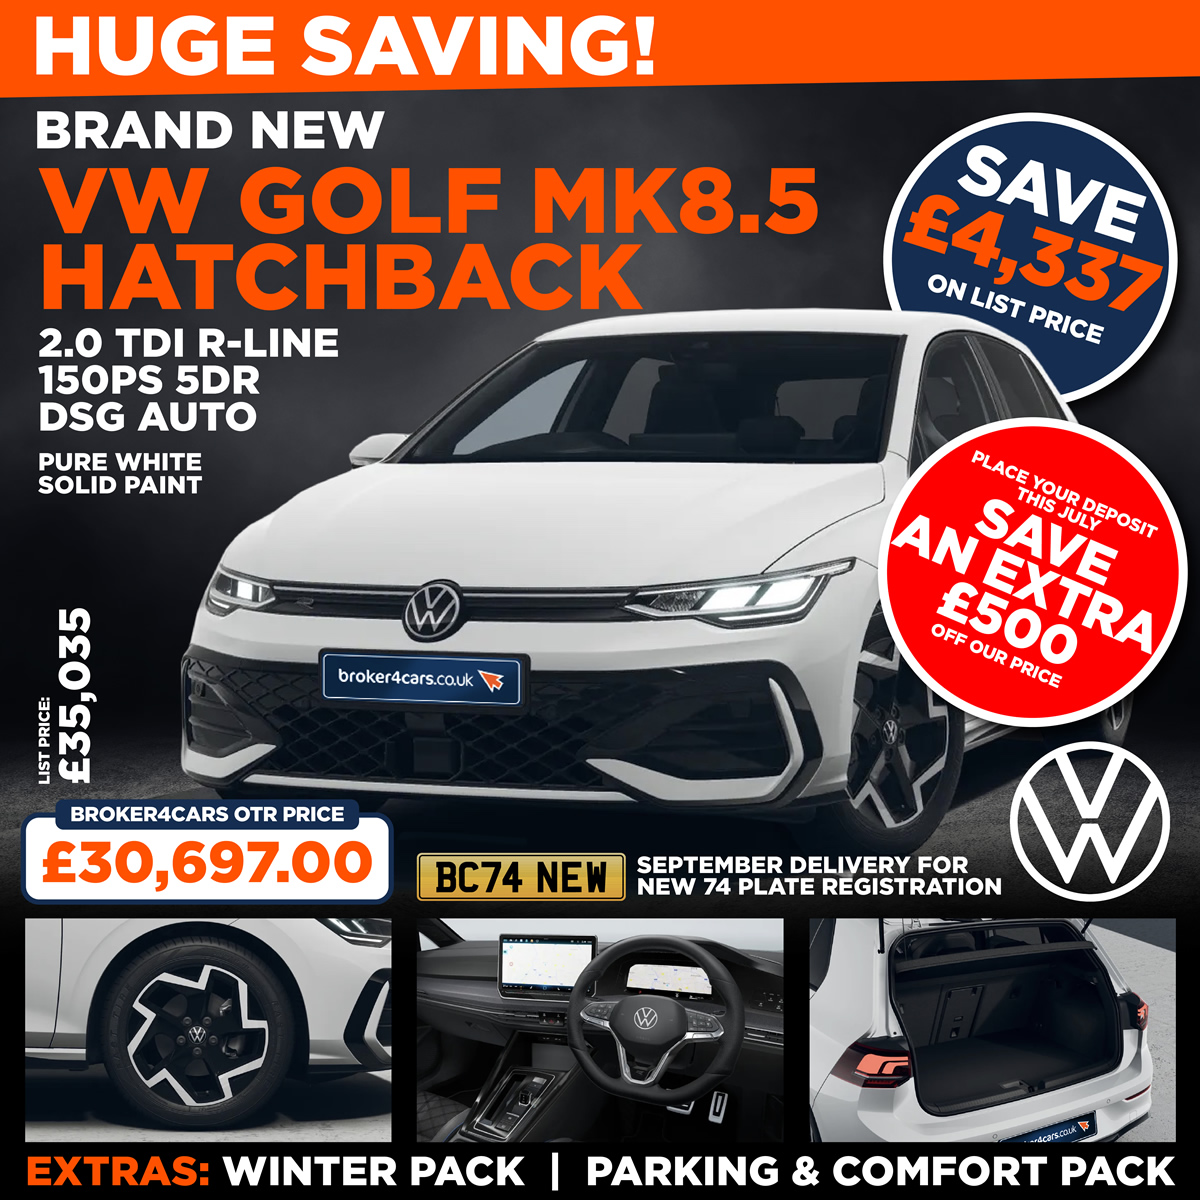 NEW VW GOLF HATCHBACK MK8.5 2.0 TDI R-Line 150ps 5dr DSG Auto. Pure White Solid Paint. Winter Pack. Parking & Comfort Pack. VW's are currently due September for the new 74 plate registration. List Price £35,035.00 so saving £4,337. Broker4Cars Price £30,697 OTR. Place your deposit this July, save an extra £500